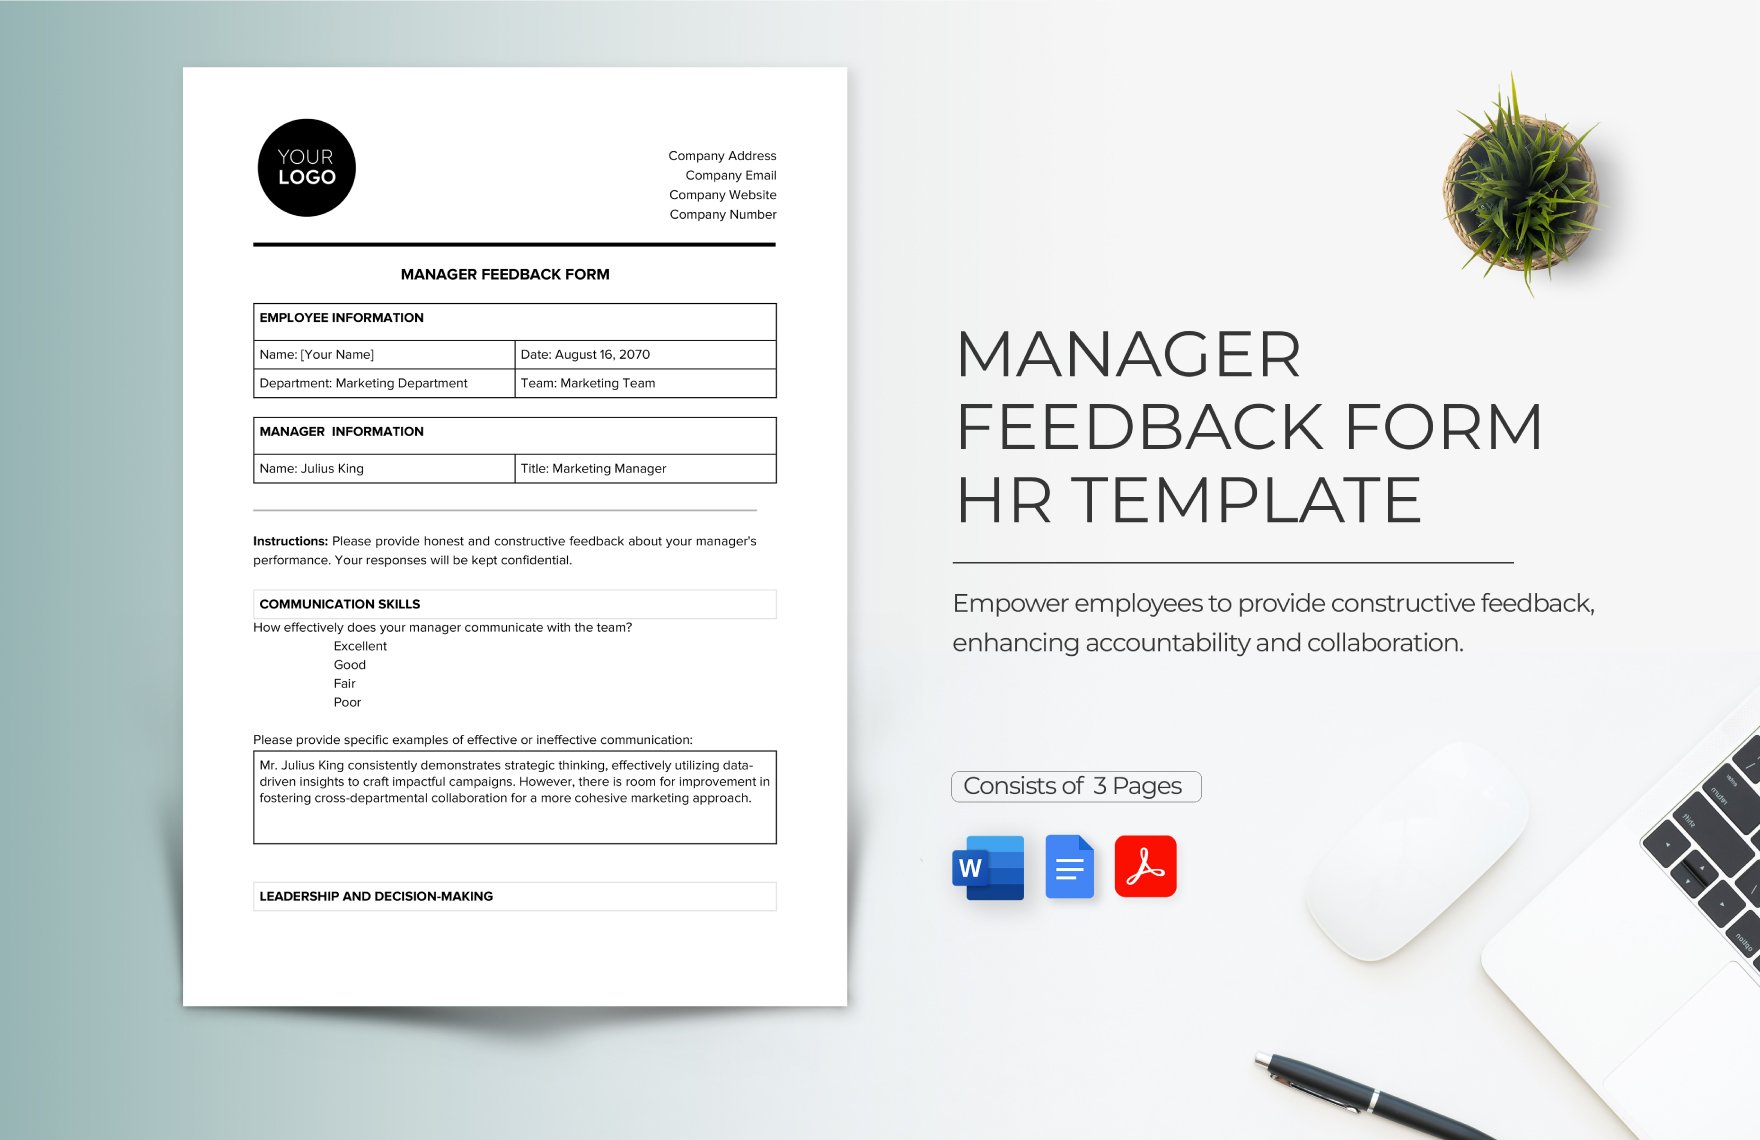 Manager Feedback Form HR Template in Word, Google Docs, PDF